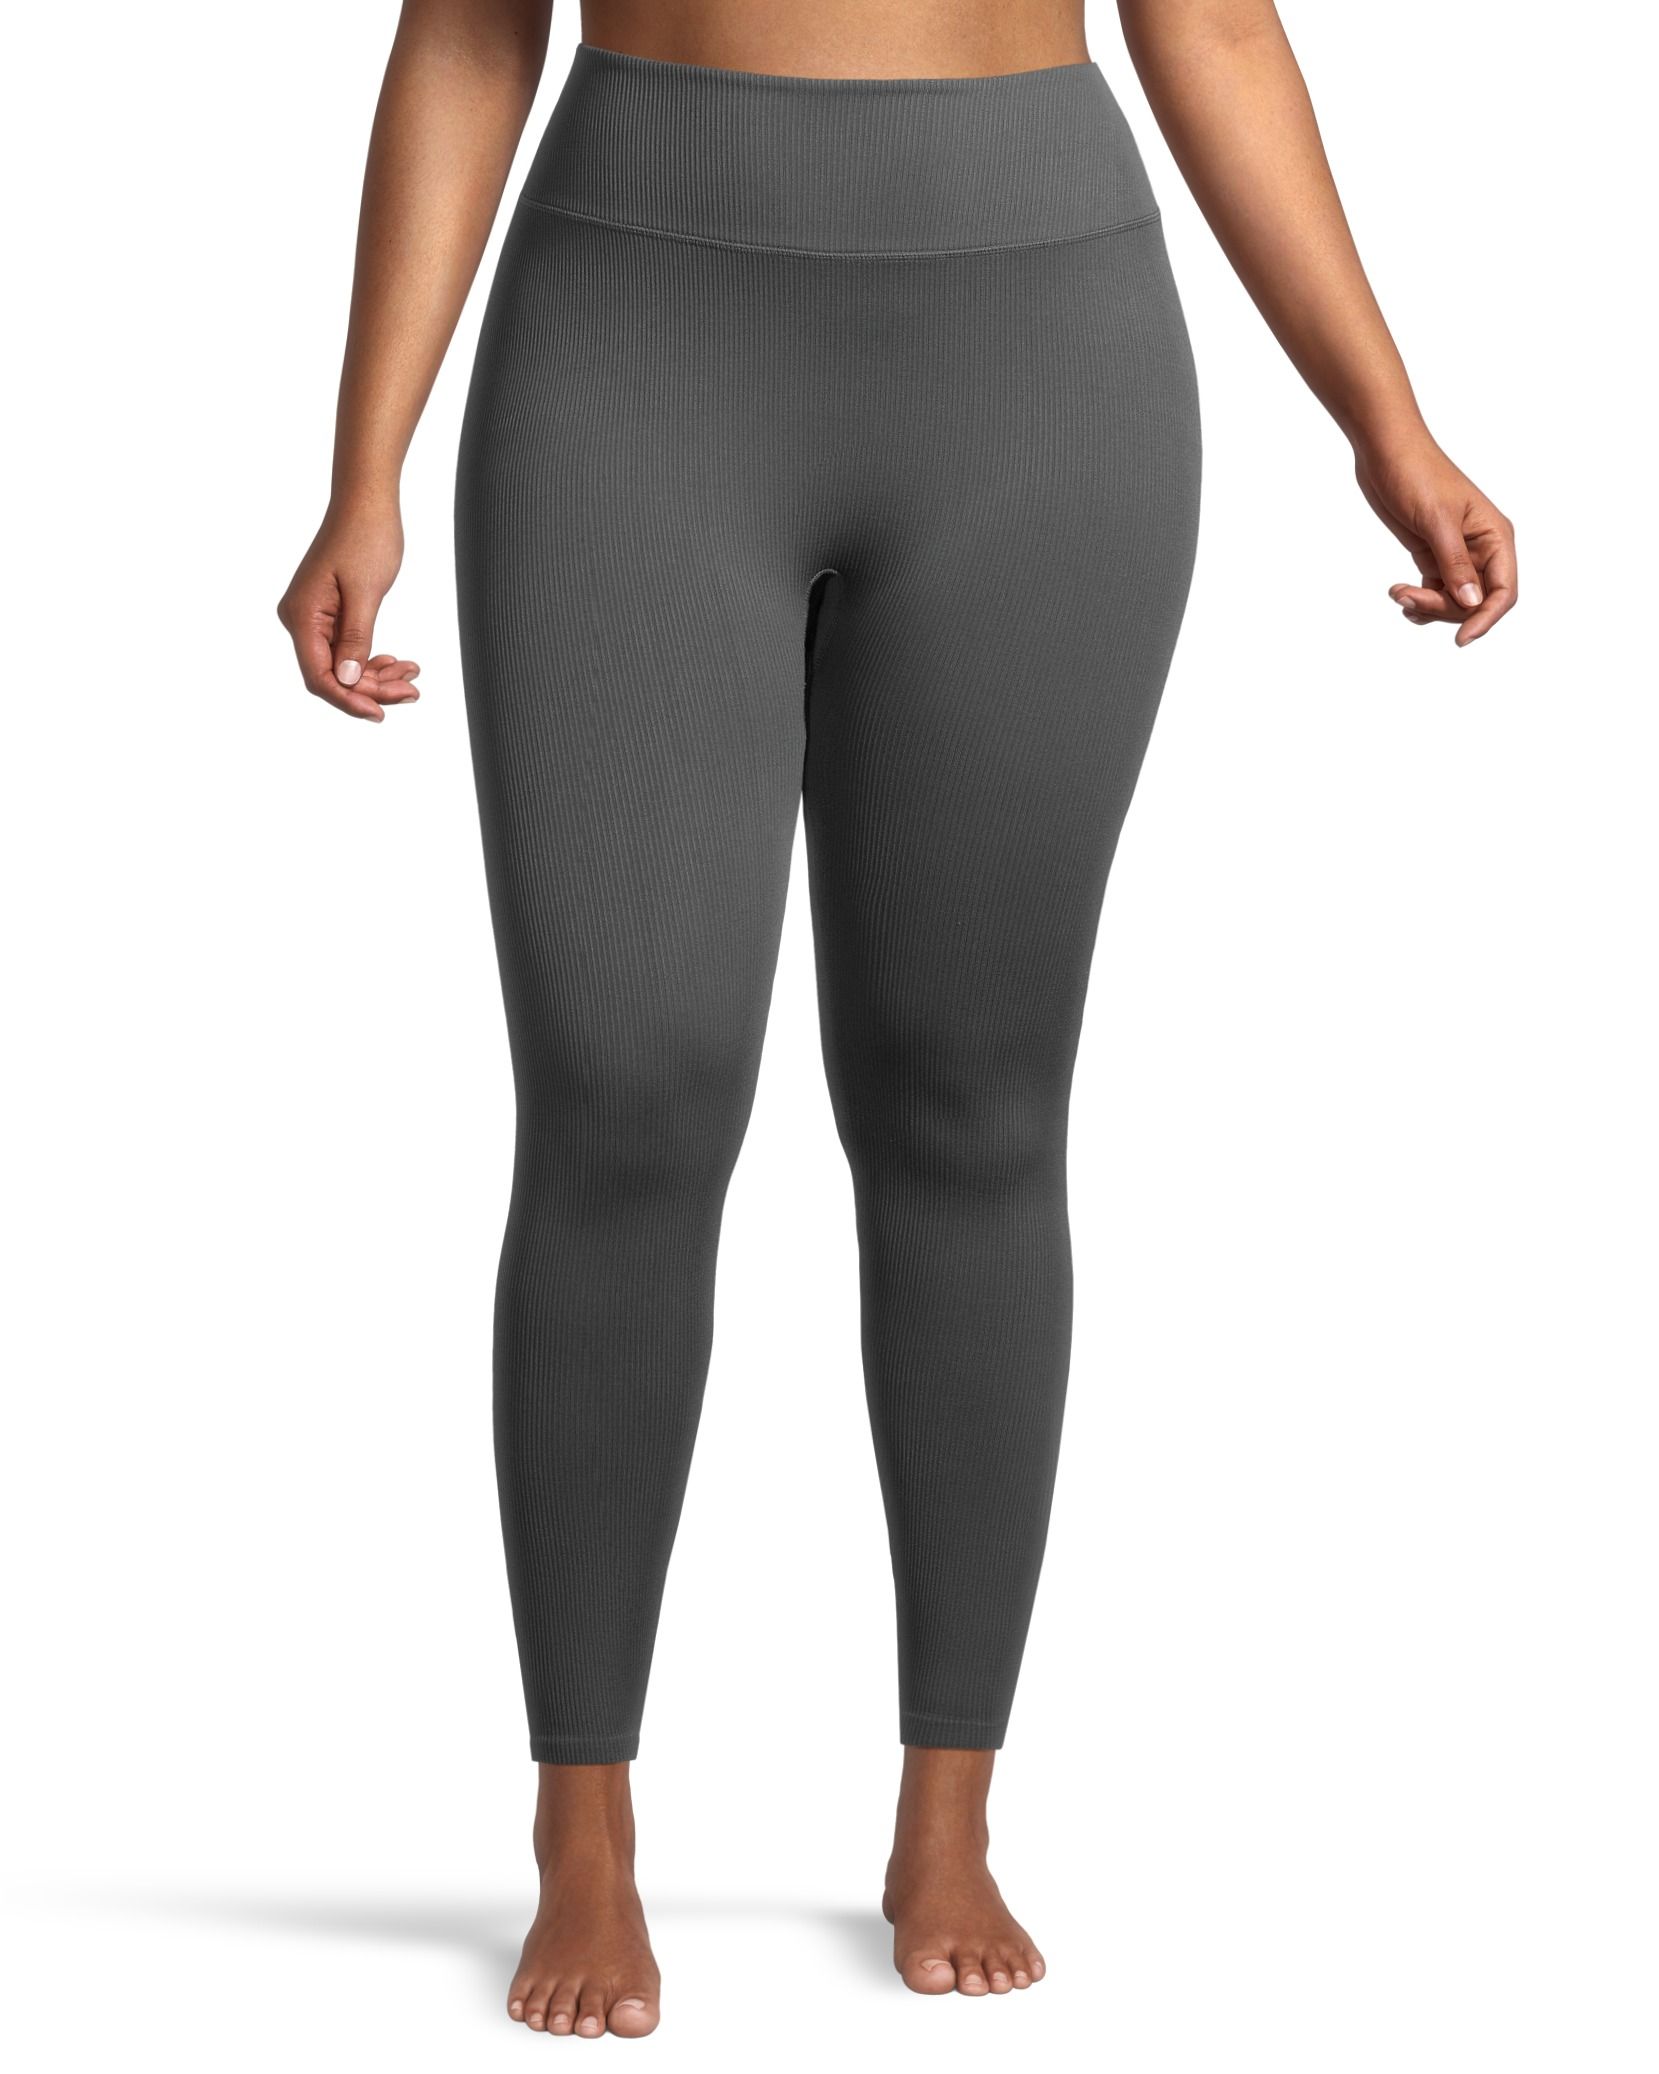 https://media-www.marks.com/product/marks-work-wearhouse/ladies-world/ladies-knits/410033587438/shambhala-women-s-high-rise-live-in-confidence-ribbed-leggings-7-8-length-bf238e51-7343-4831-8296-1a11faba998f-jpgrendition.jpg?imdensity=1&imwidth=1244&impolicy=mZoom